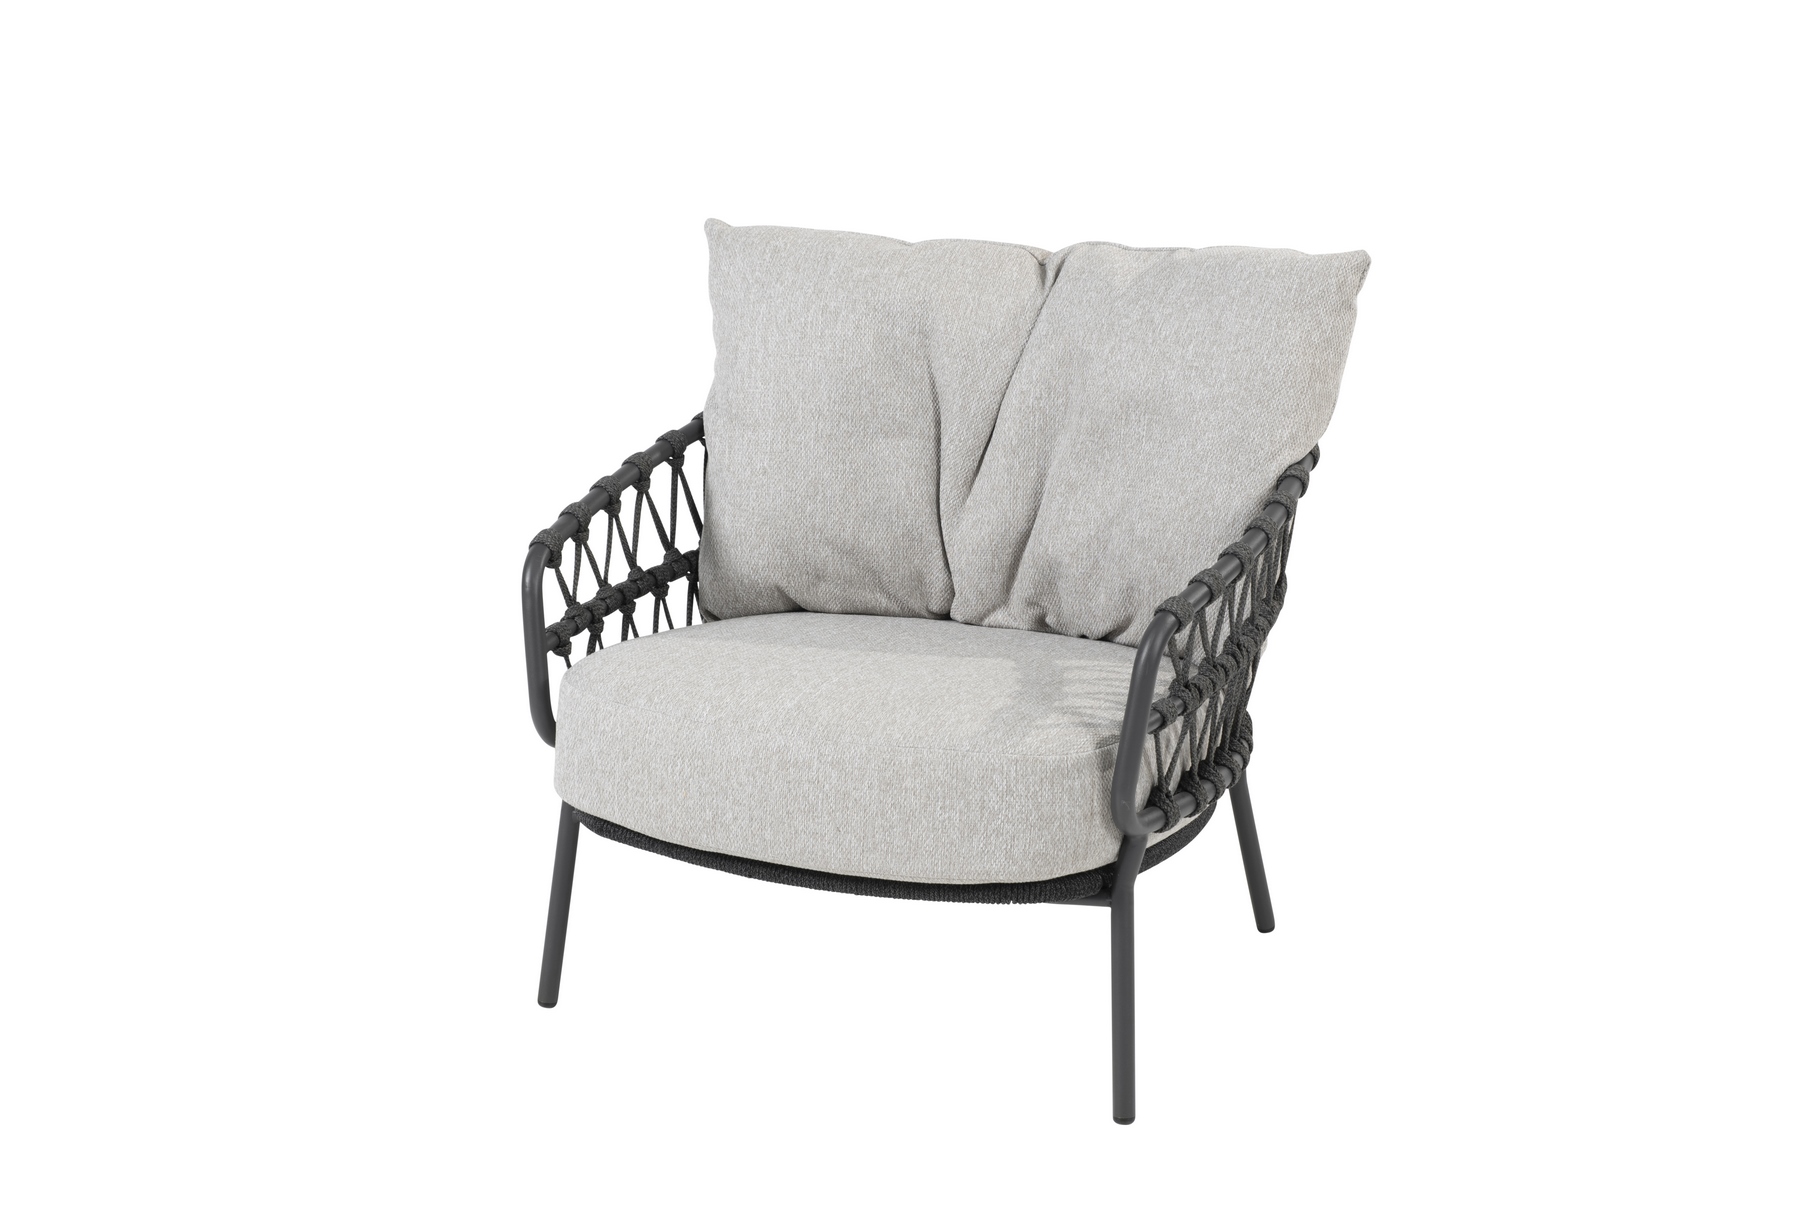 213891__Calpi_living_chair_anthracite_with_2_cushions_014.jpg